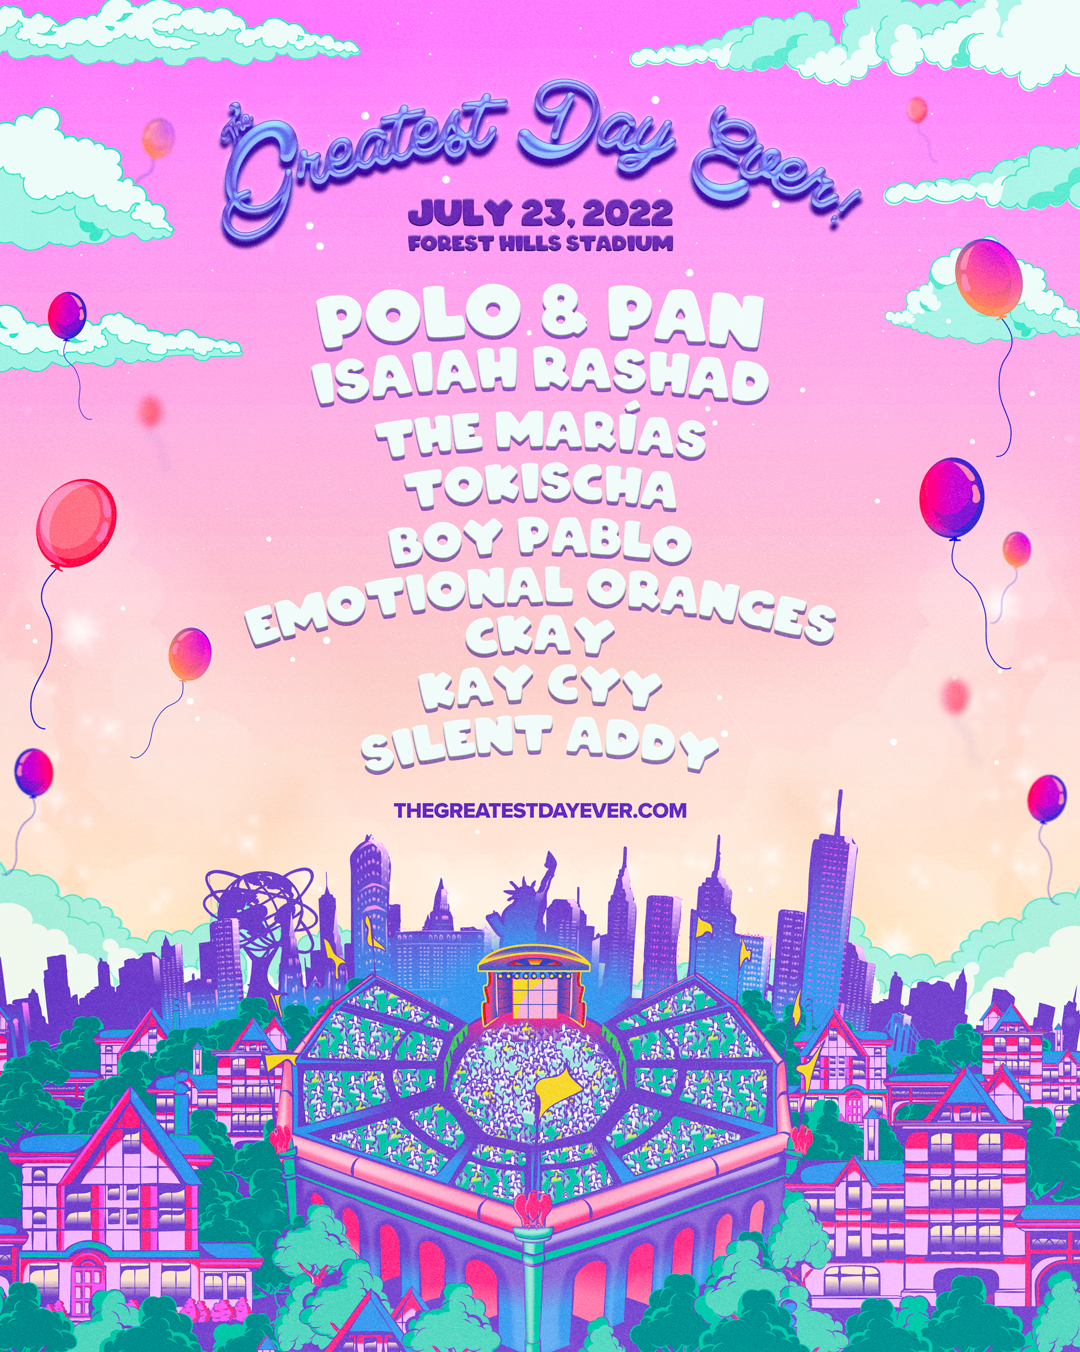 A flyer for the Greatest Day Ever festival is shown